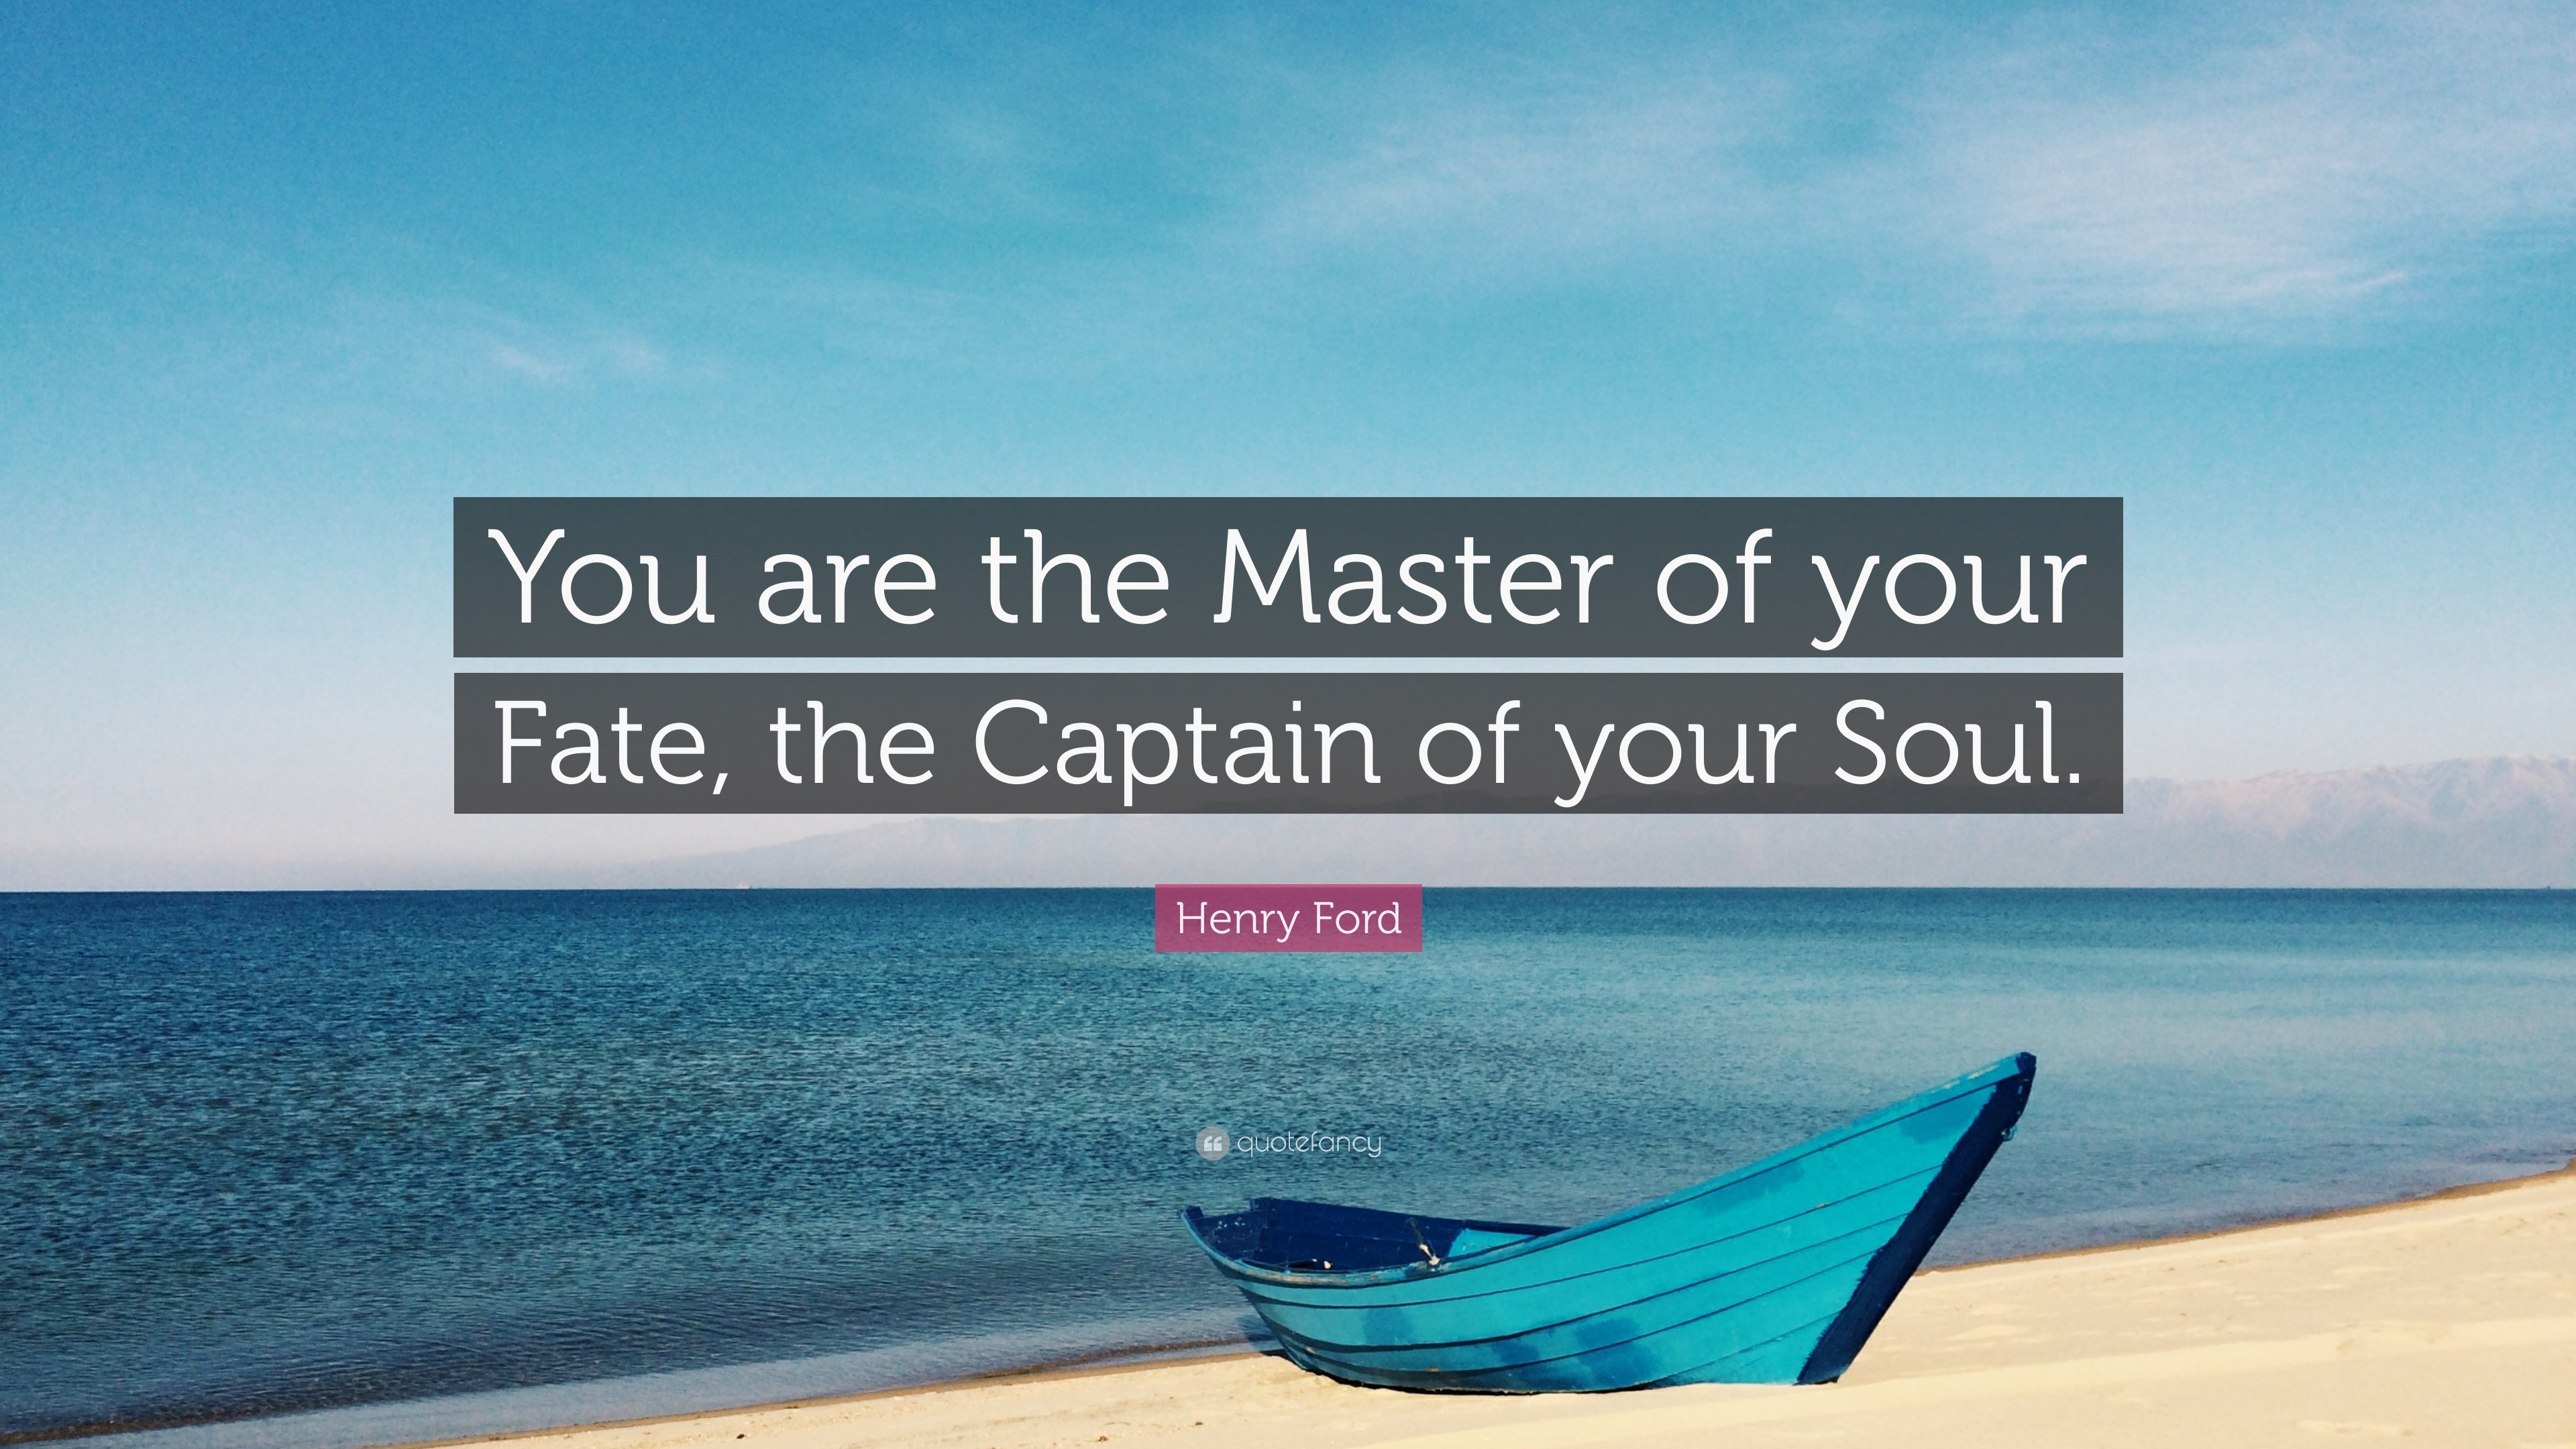 https://quotefancy.com/media/wallpaper/3840x2160/1743709-Henry-Ford-Quote-You-are-the-Master-of-your-Fate-the-Captain-of.jpg